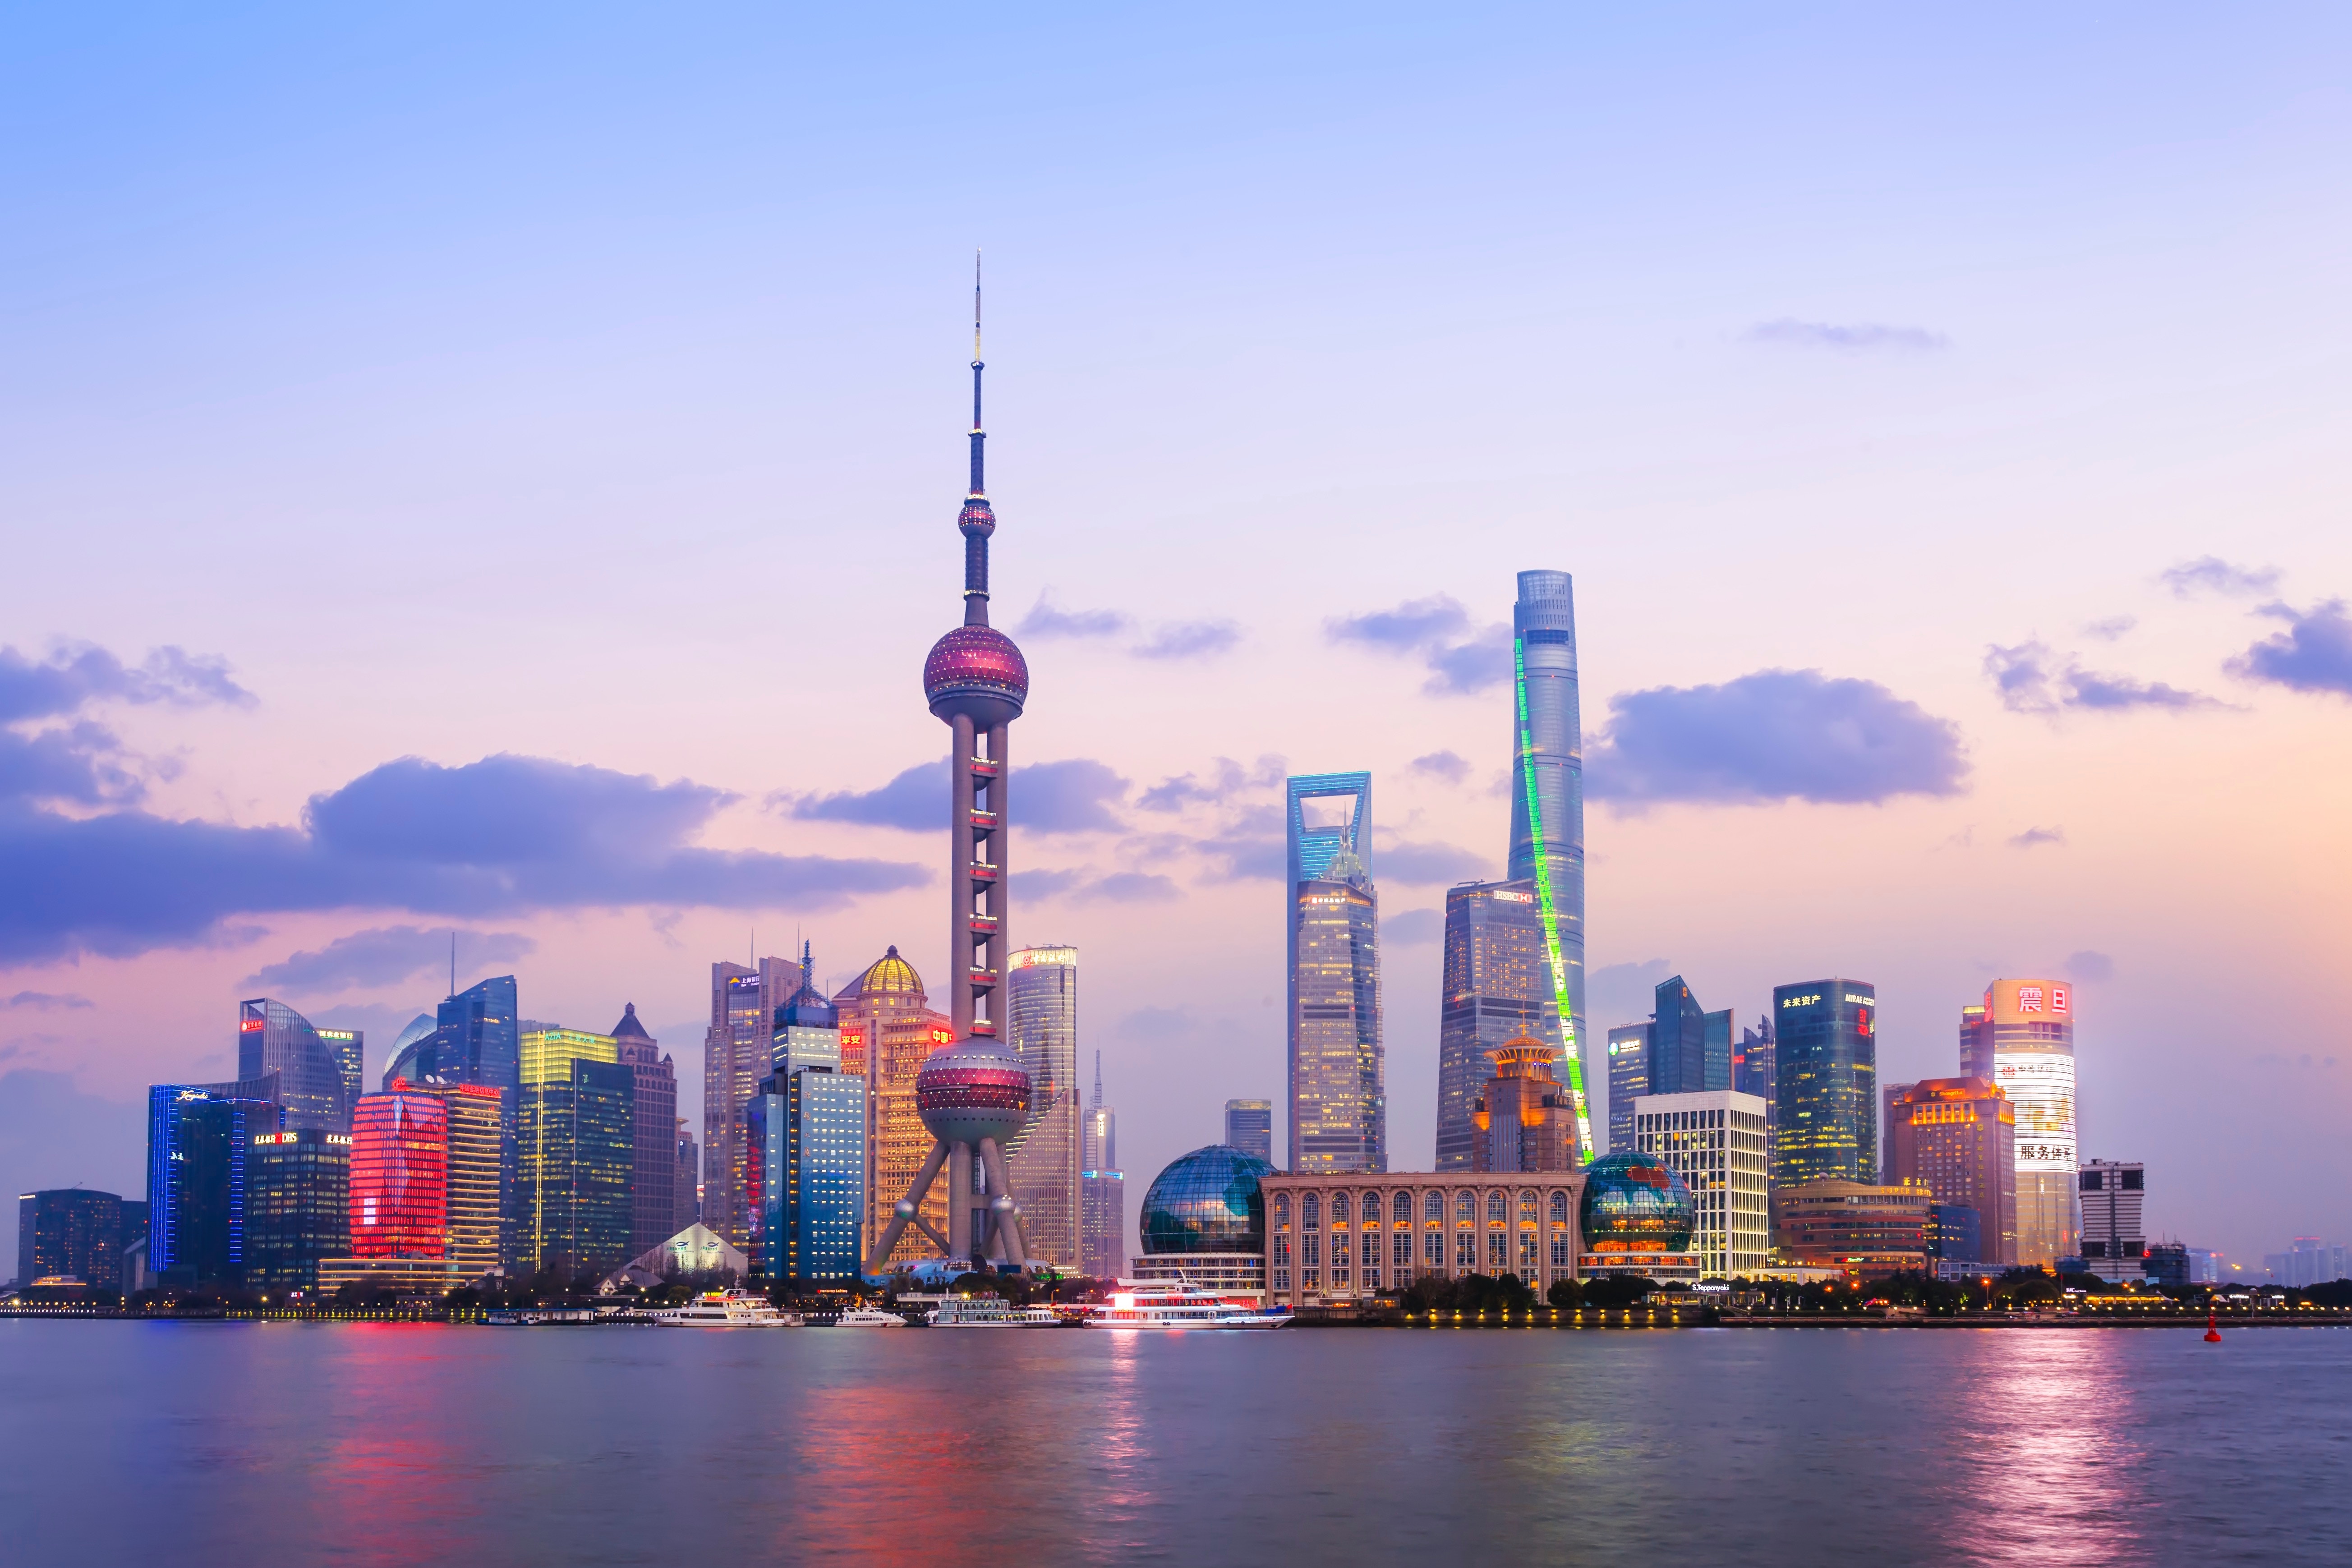 Flight Deal: Fly To Shanghai, China For As Low As $357